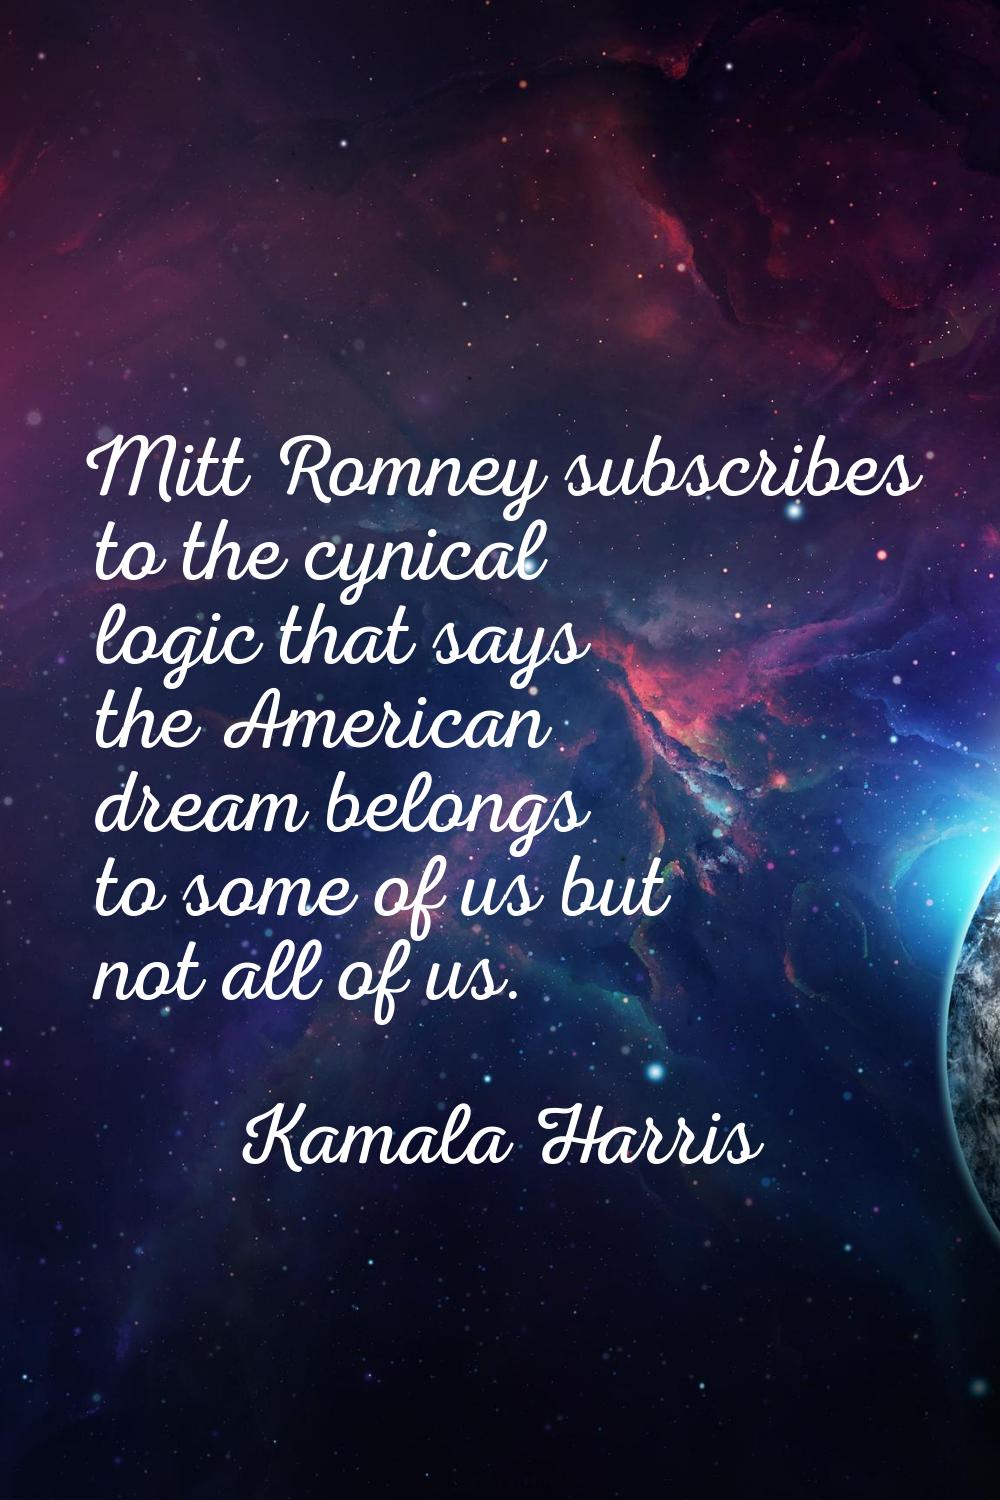 Mitt Romney subscribes to the cynical logic that says the American dream belongs to some of us but 